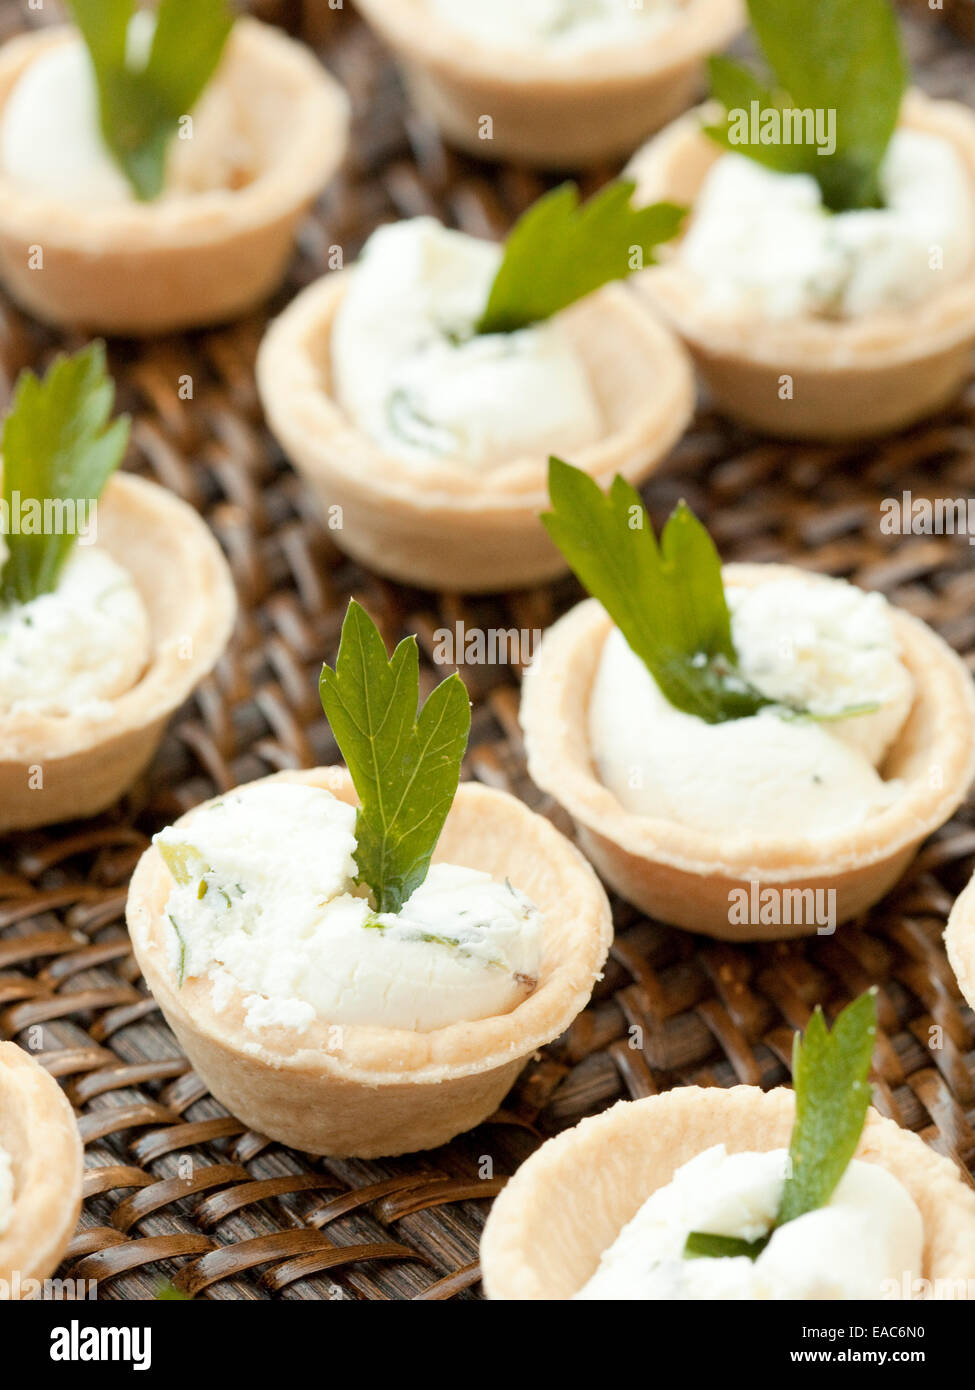 detail of goat cheese hors d'oeuvres with cilantro leaf Stock Photo